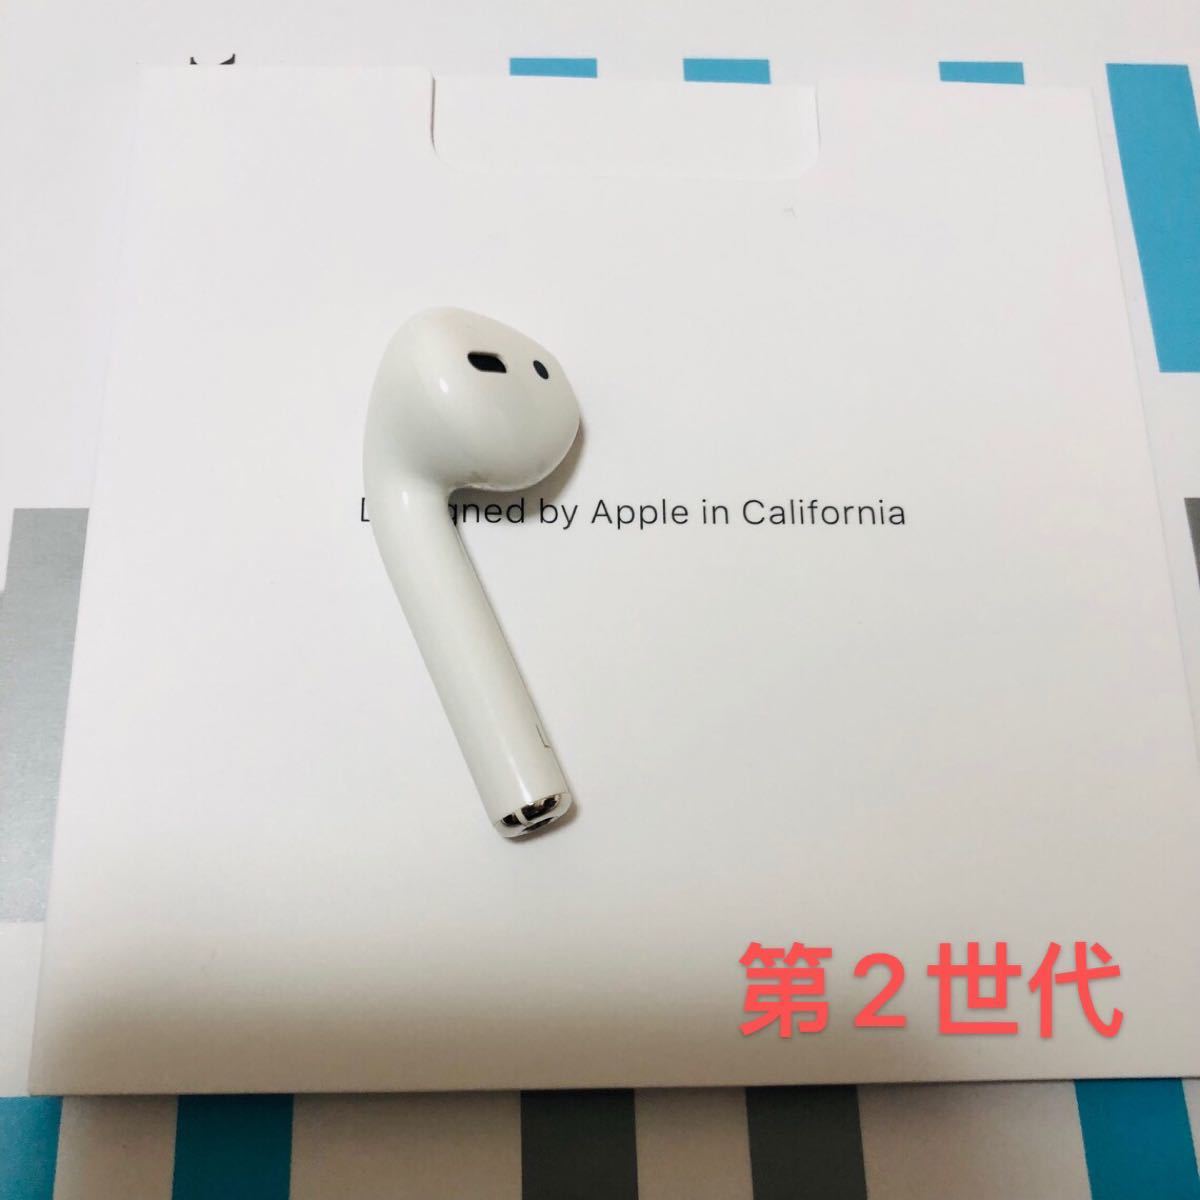 AirPods Pro 第1世代 左耳のみ 国内正規品 エアーポッズ｜PayPayフリマ